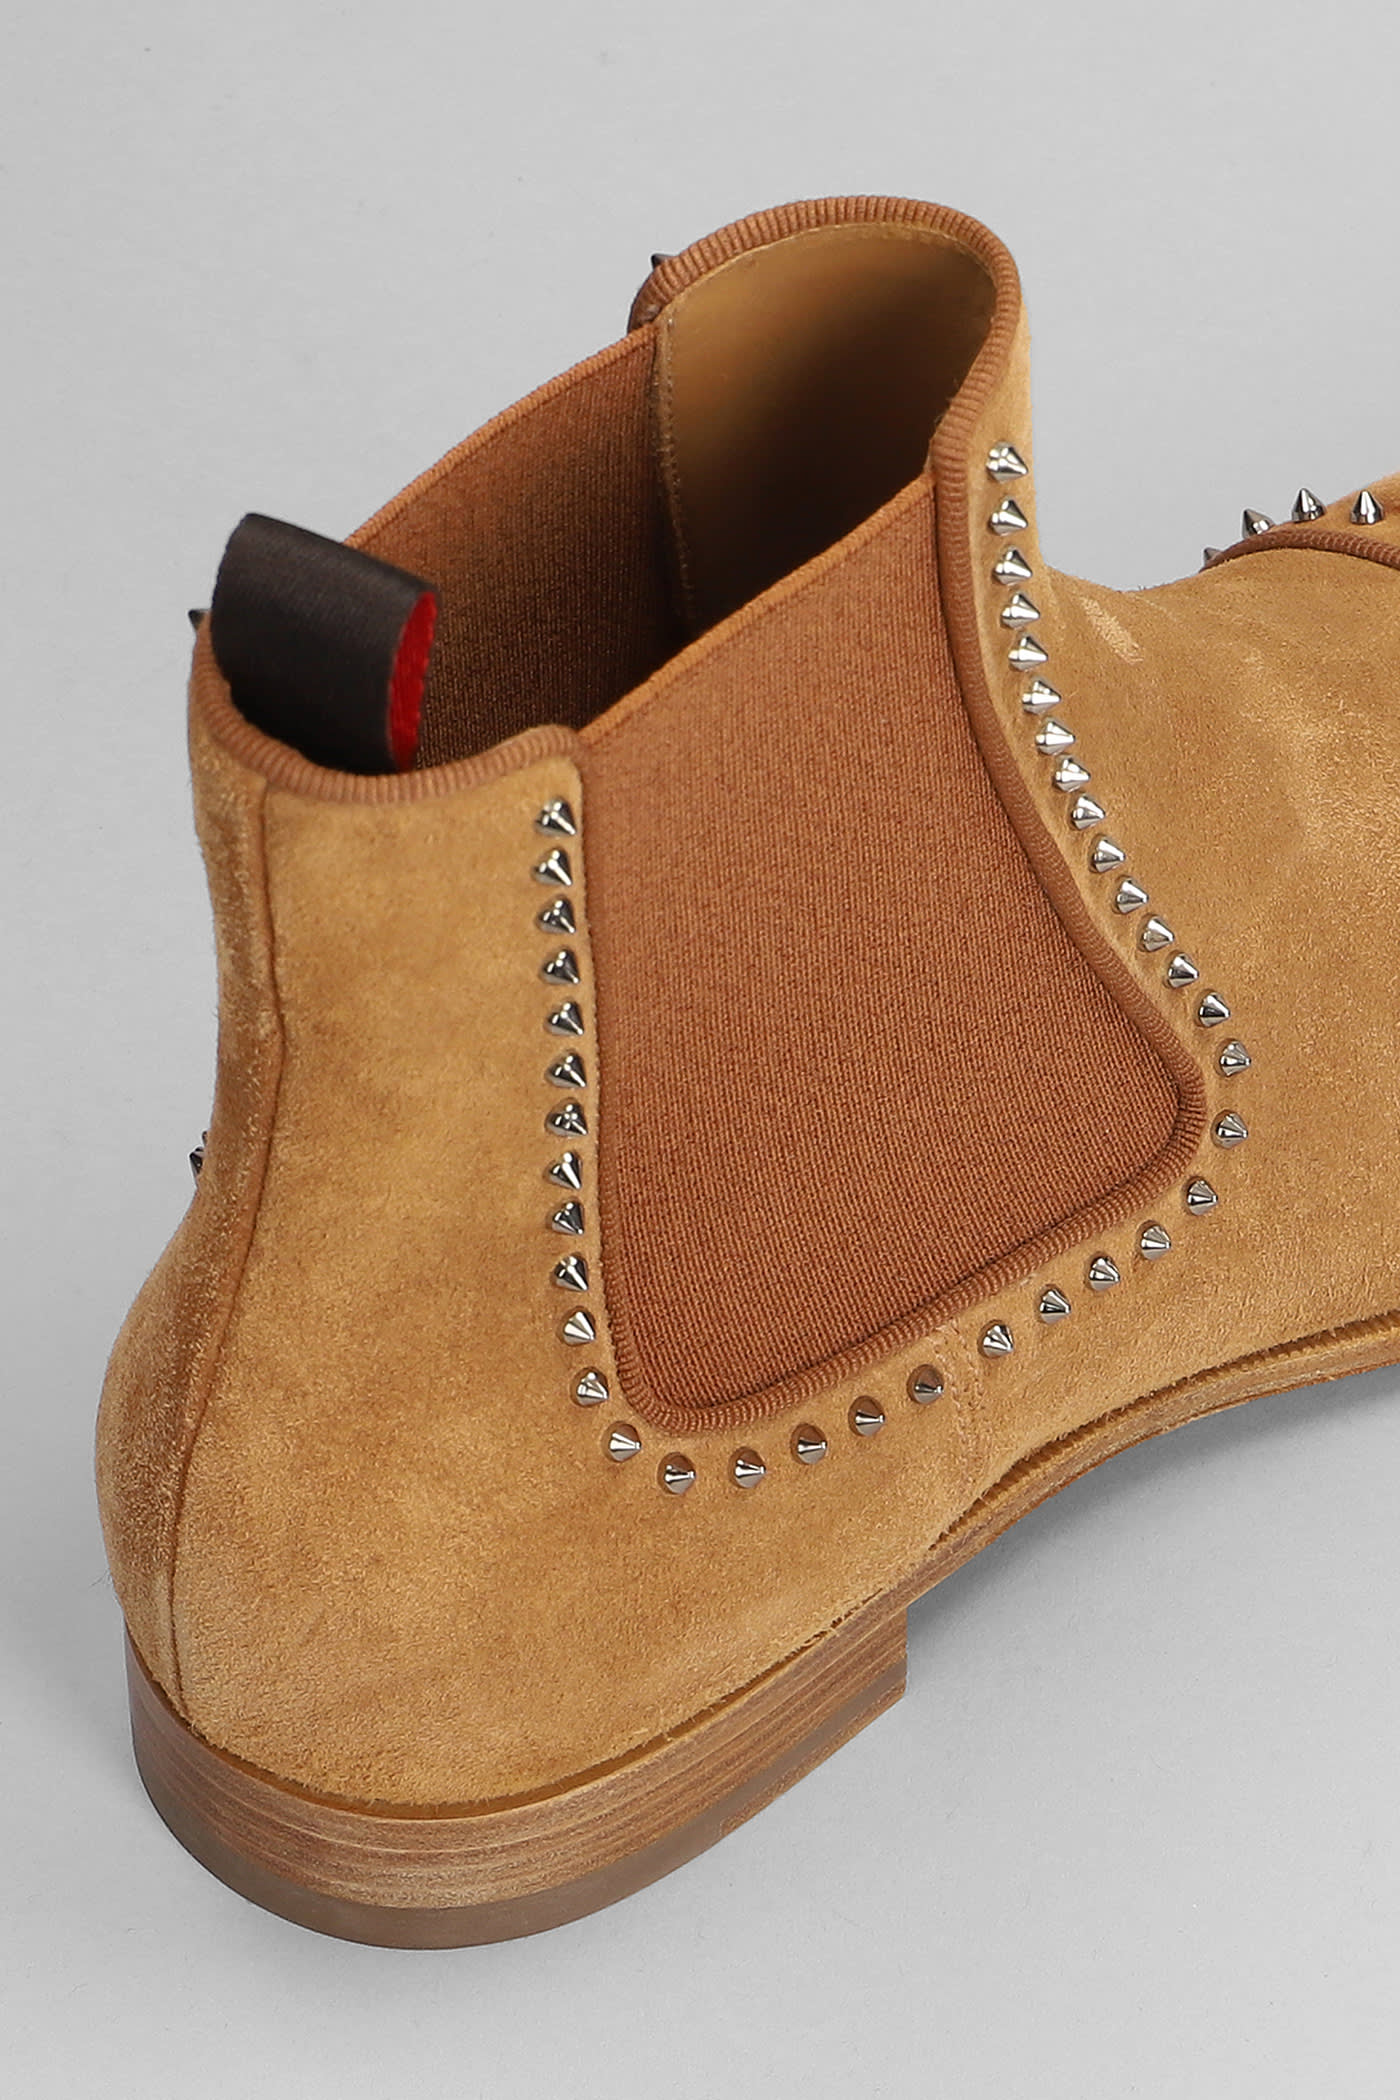 Chelsea Cloo Suede Boots in Brown - Christian Louboutin